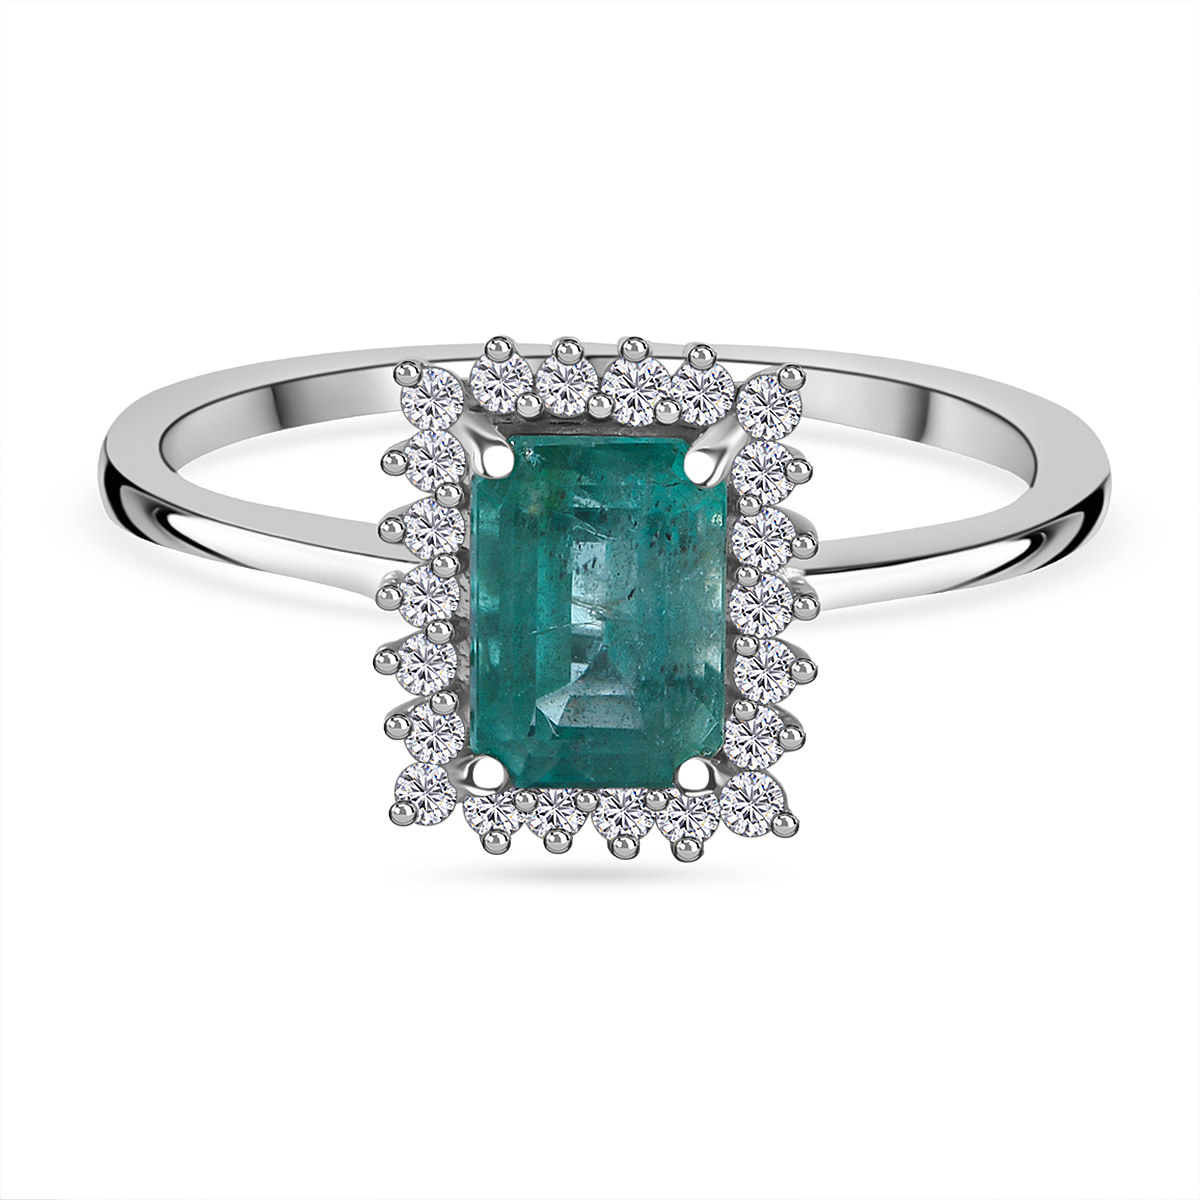 Glenstones - AAA Zambian Emerald and Diamond Halo Ring in Rhodium Overlay Sterling Silver 1.16 Ct.